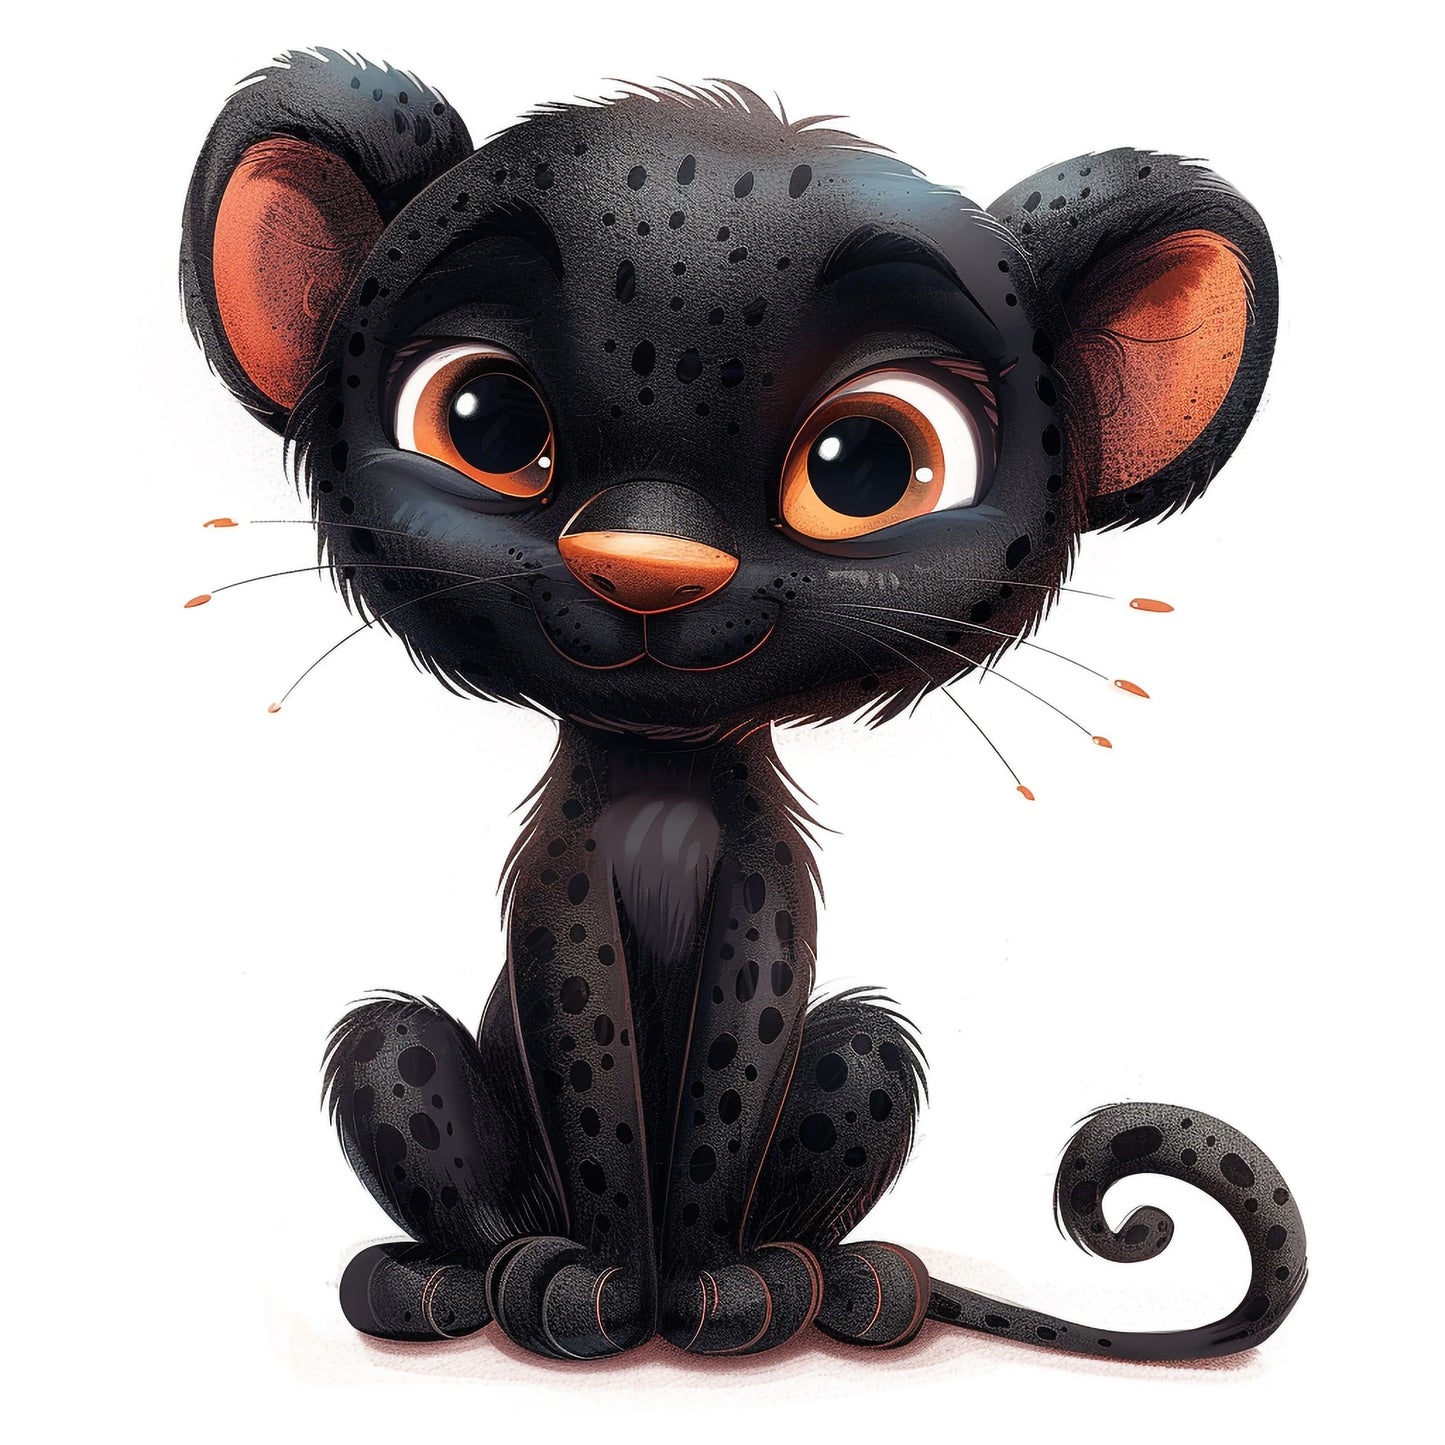 Whimsical Cute Panther Illustration with Airbrush Effect